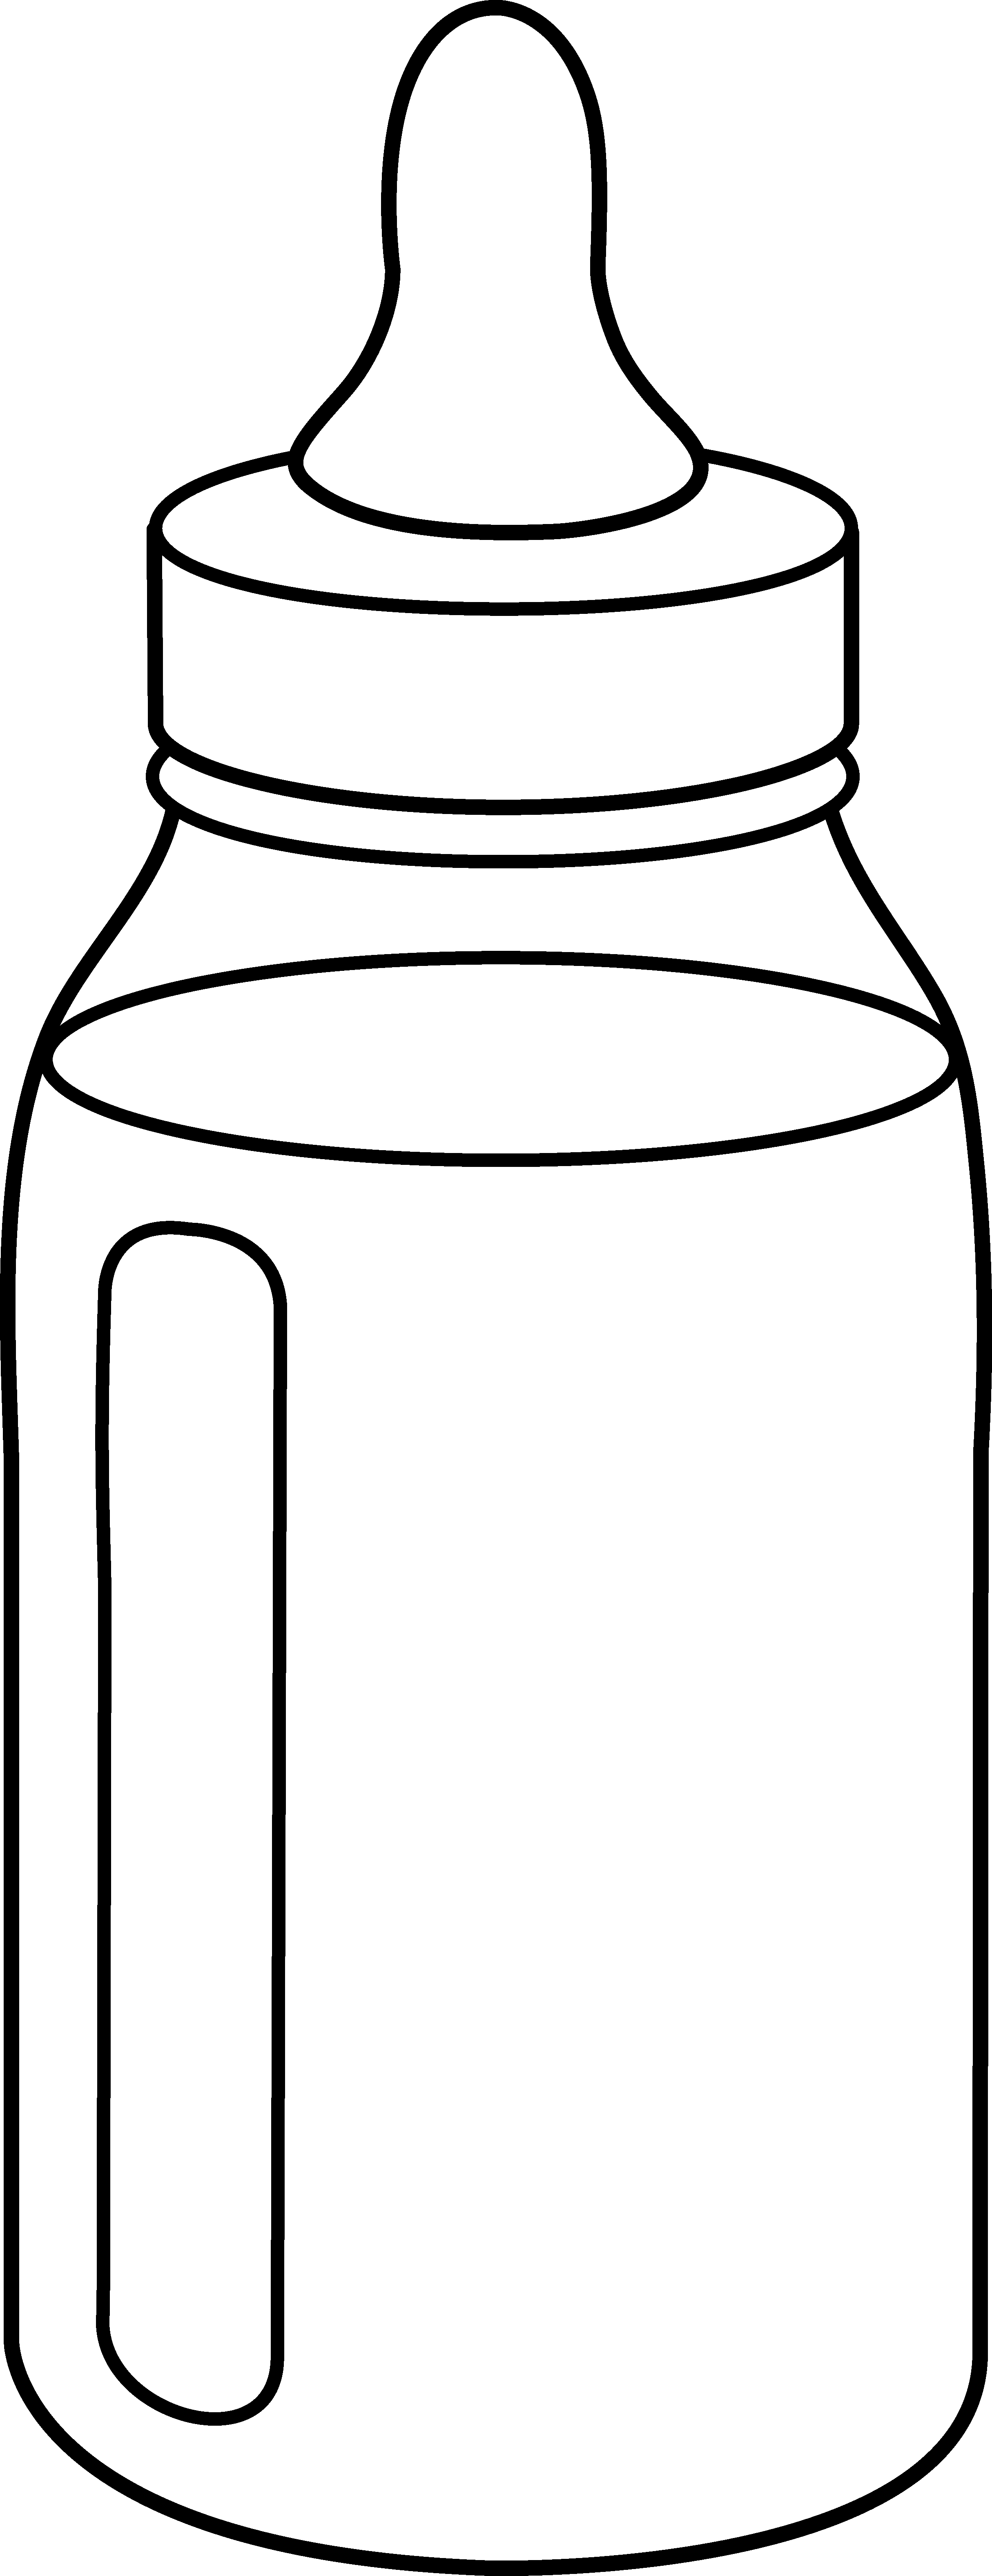 Baby Bottle Outline Drawing Images  Pictures - Becuo